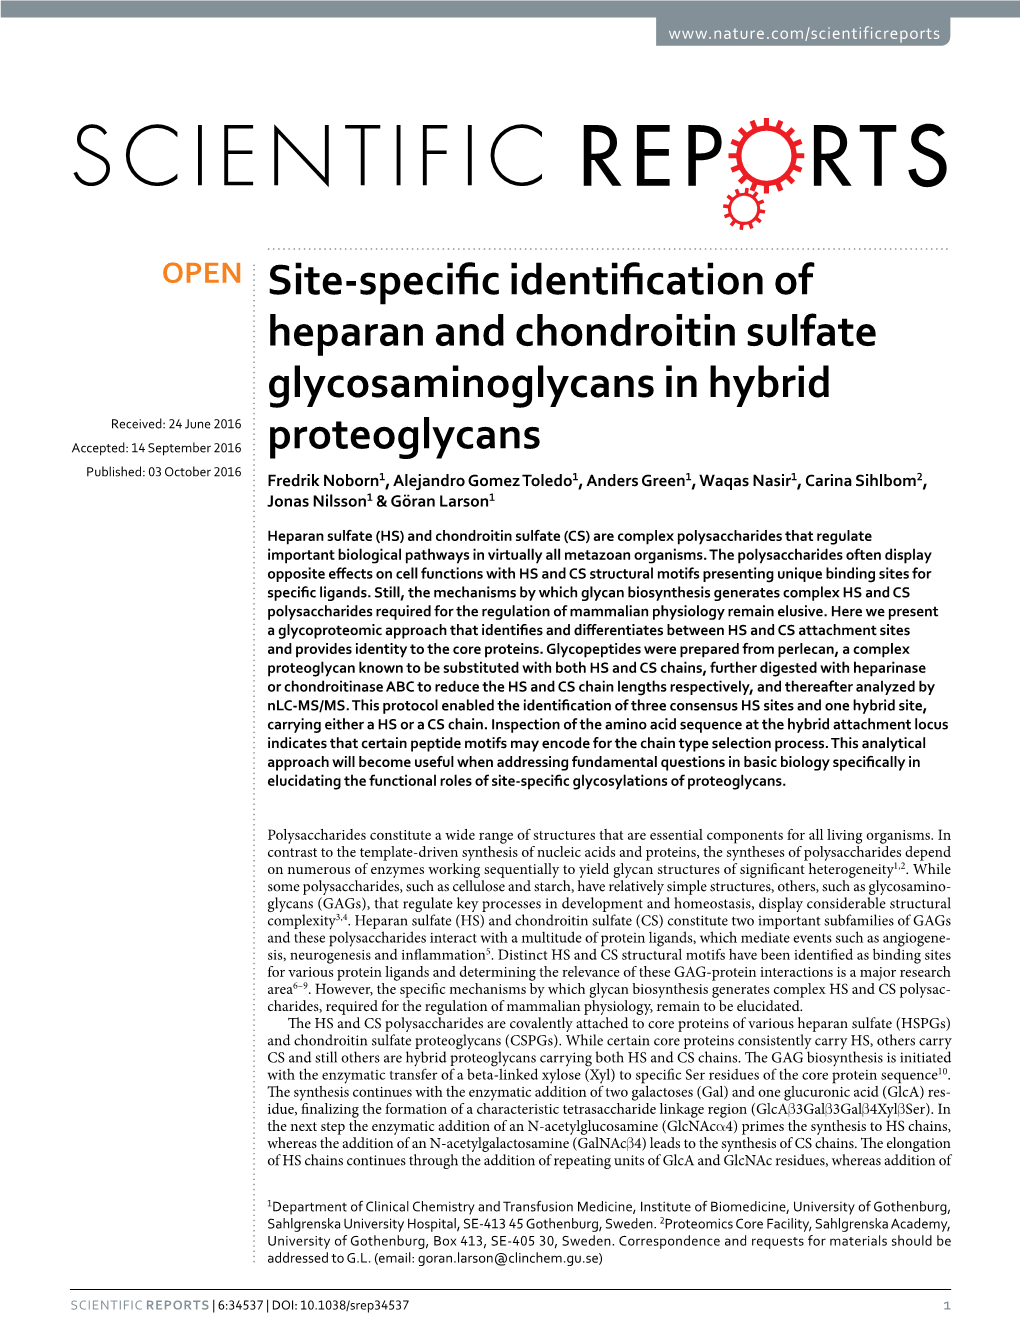 Site-Specific Identification of Heparan and Chondroitin Sulfate